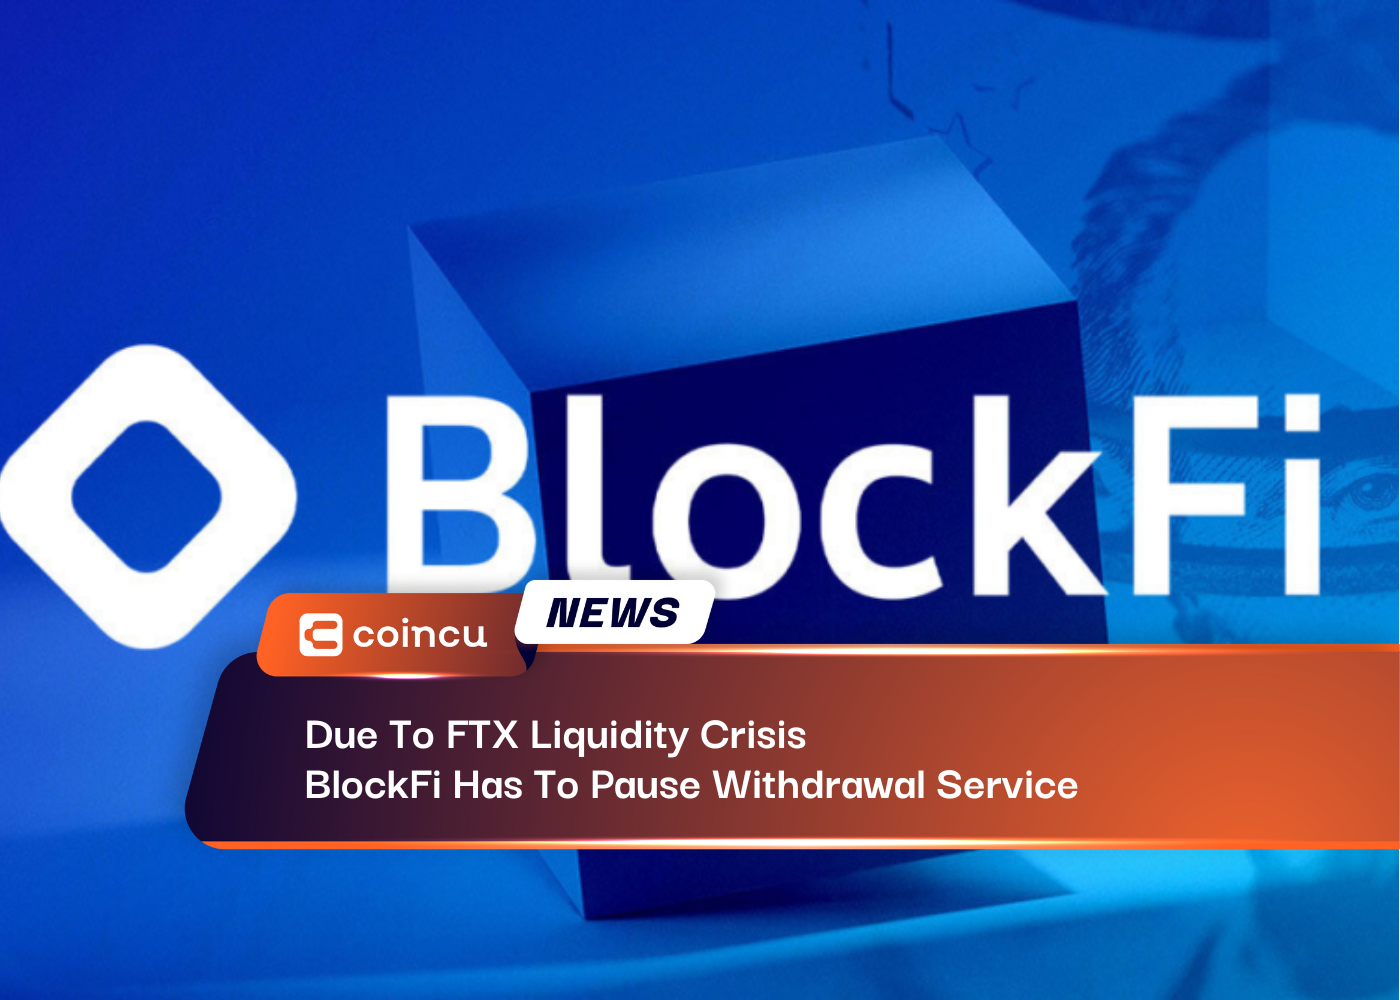 Due To FTX Liquidity Crisis, BlockFi Has To Pause Withdrawal Service